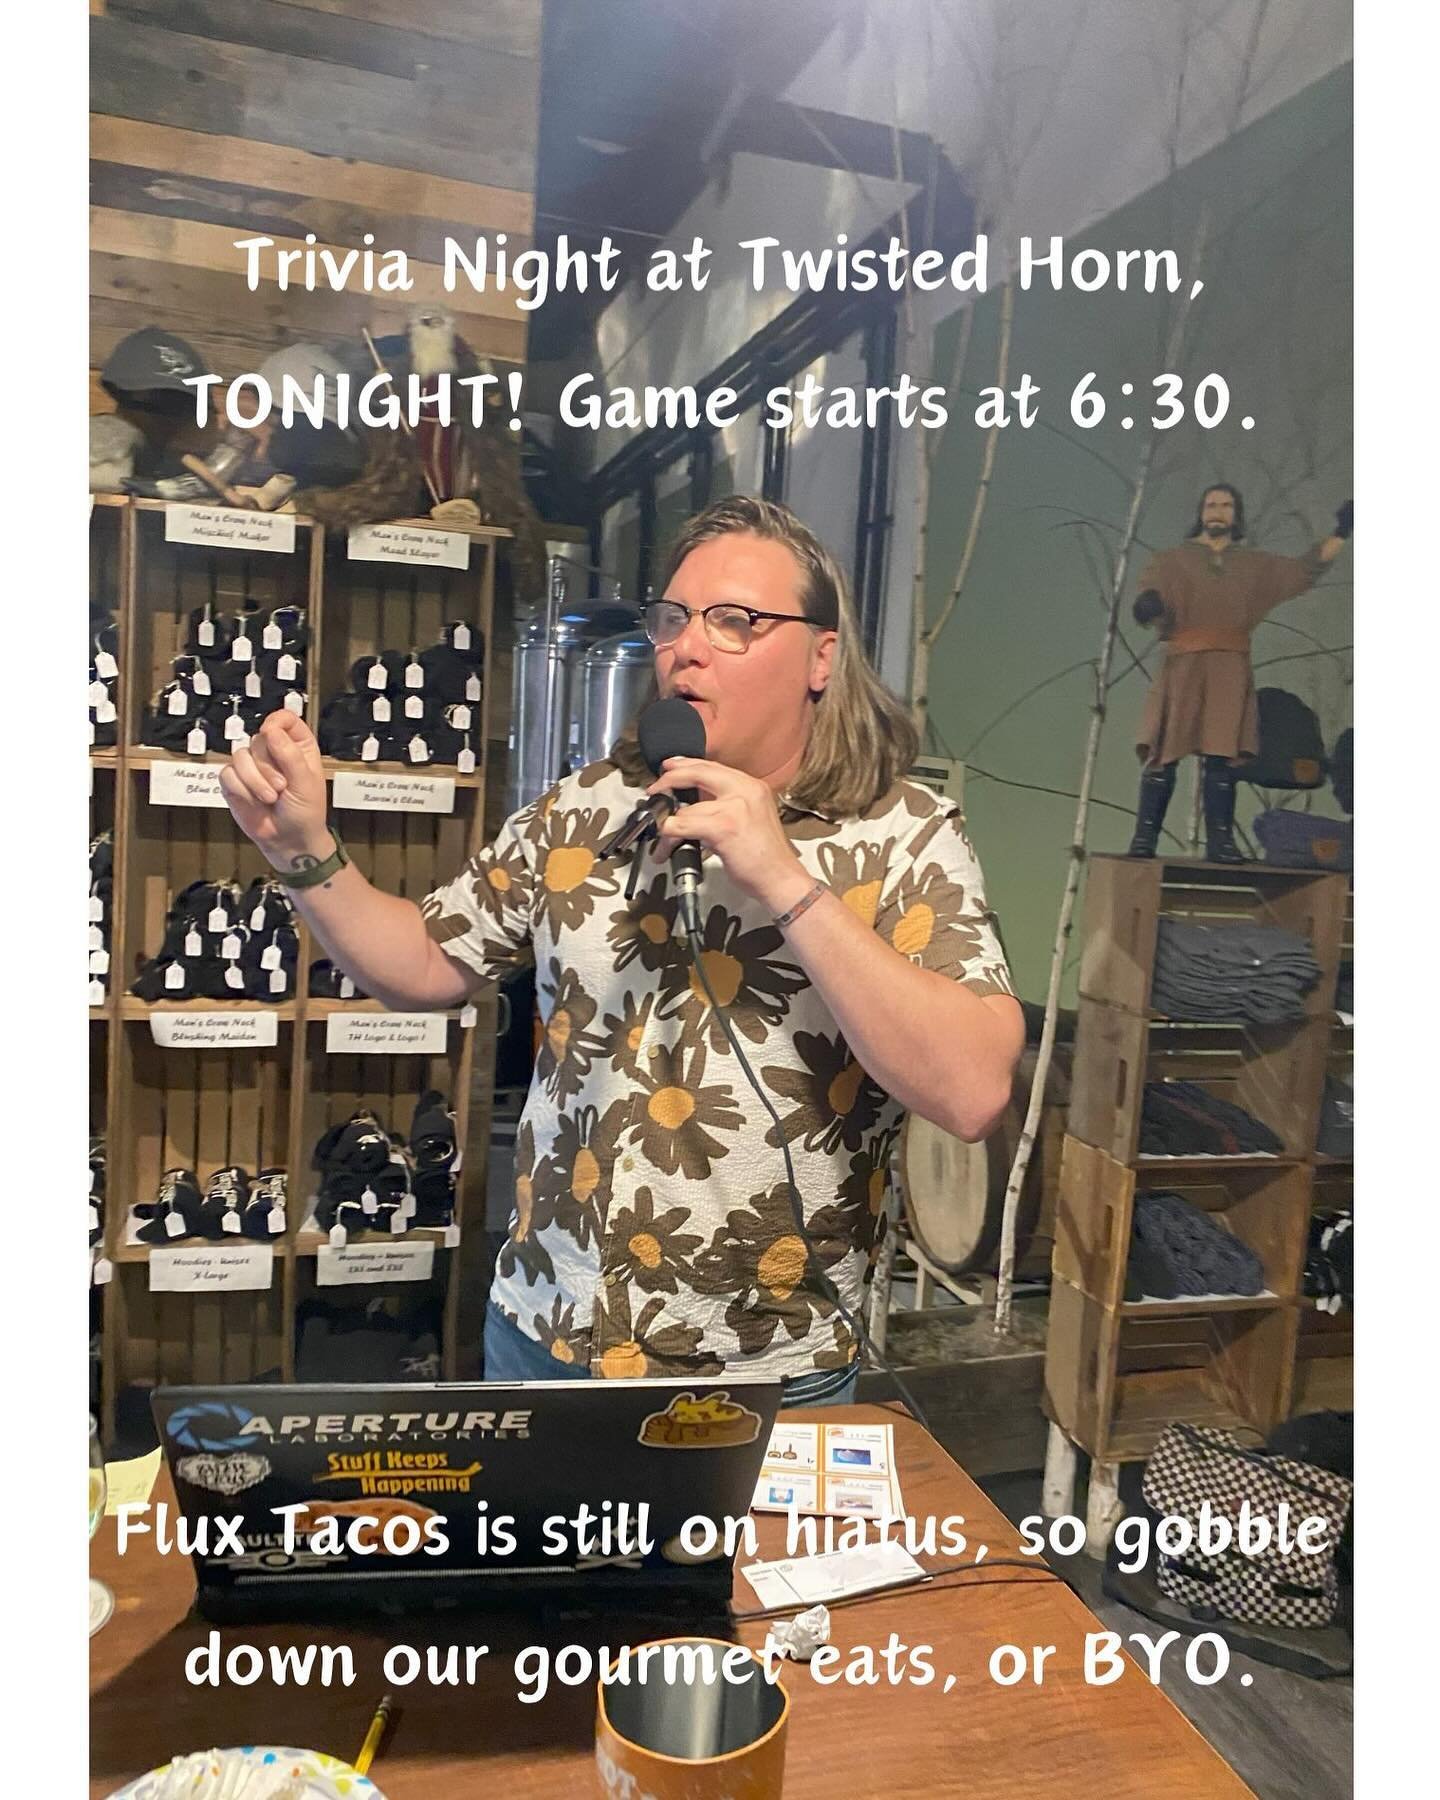 Greetings to all the &quot;brainiacs&quot; out there. It's Thursday Night Trivia hosted by @gamenightlive at Twisted Horn, TONIGHT. Don't forget, we will also be releasing our newest mead &quot;Lowlander&quot; (made with blackberry blossom honey, app